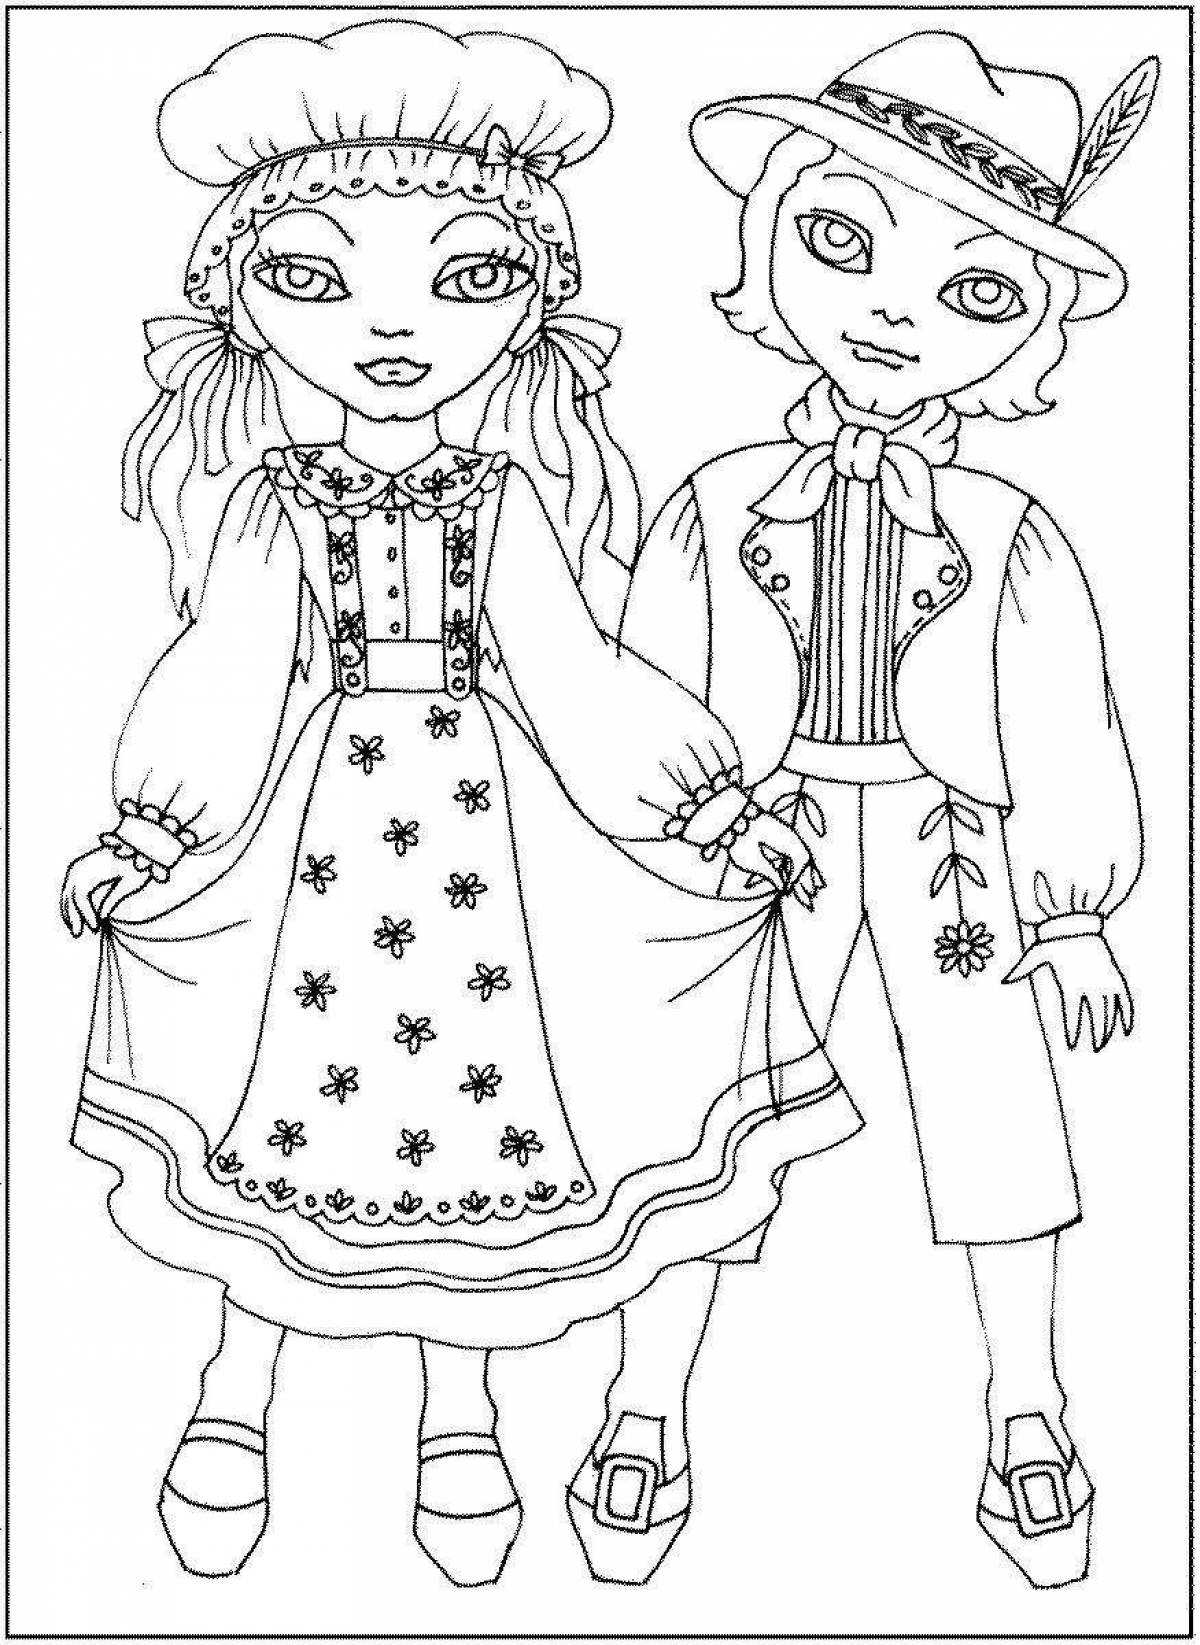 Coloring page amazing belarusian national costume